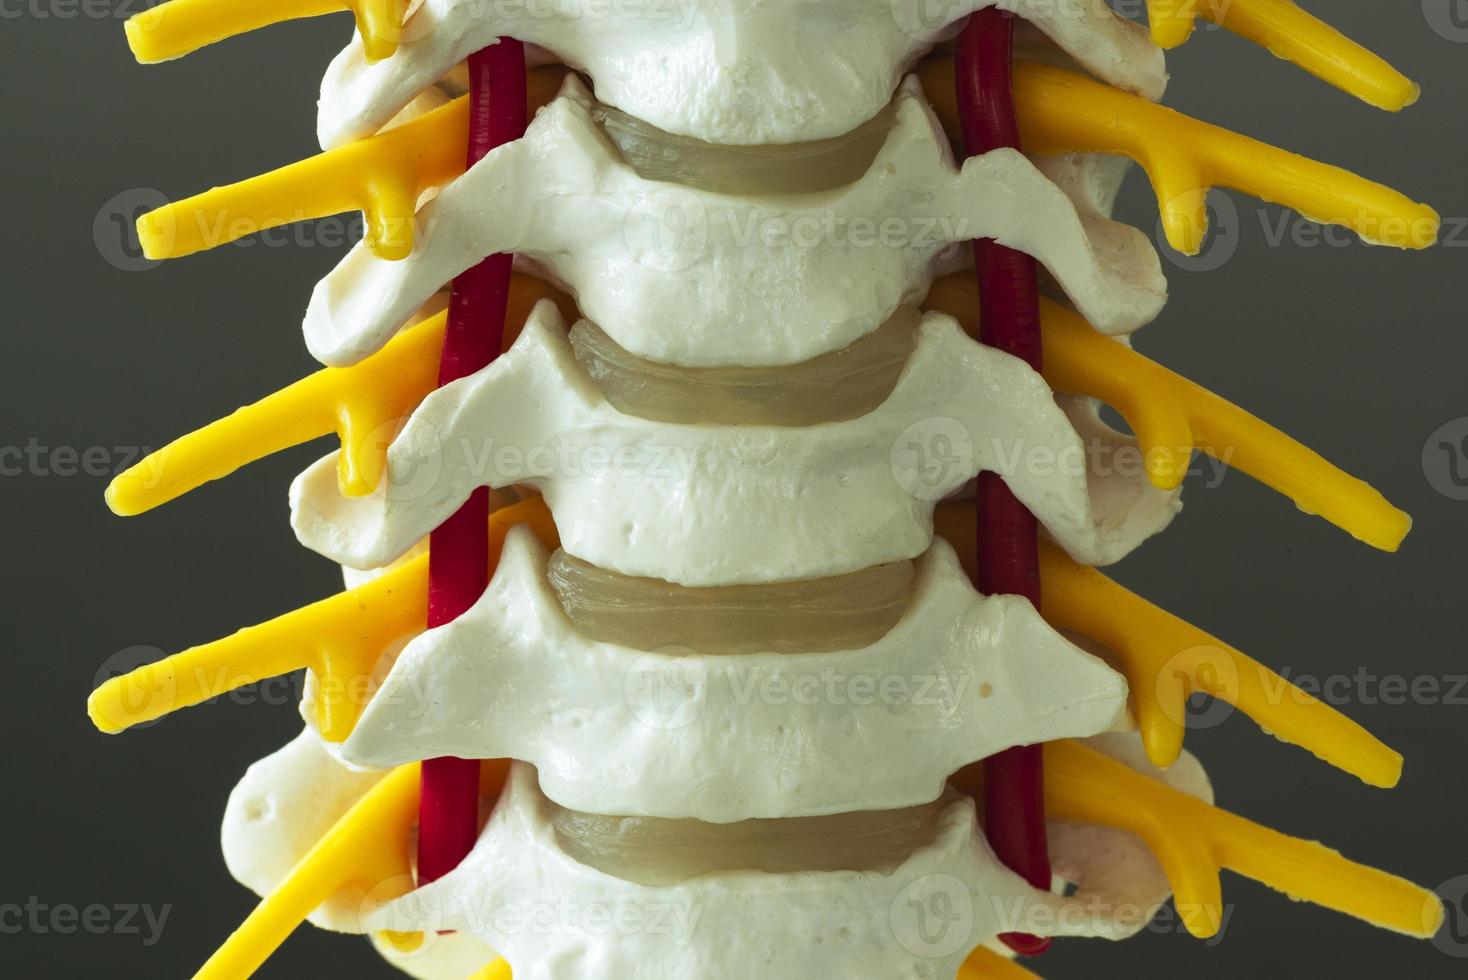 Close-up view of cervical spine model photo